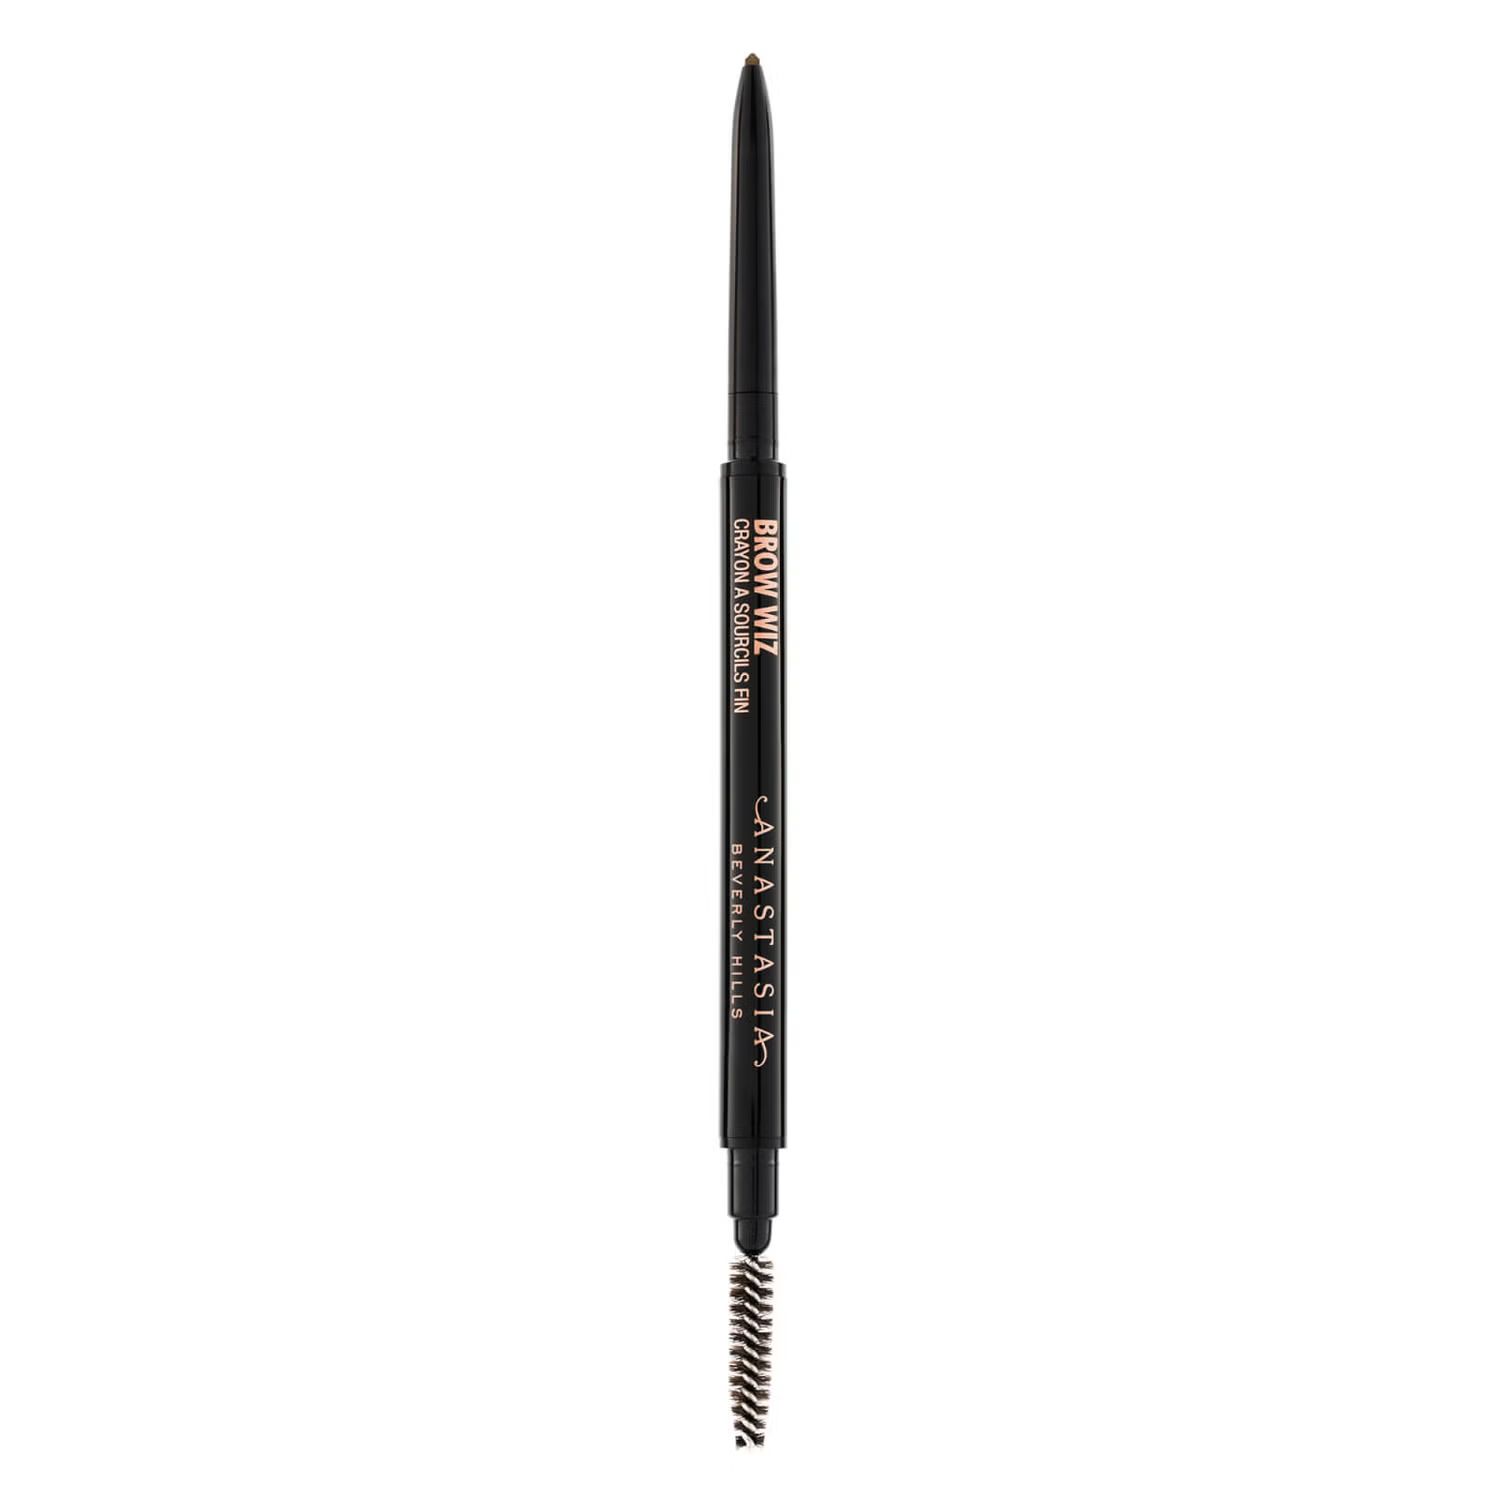 Anastasia Beverly Hills Brow Wiz 0.08g (Various Shades) | Cult Beauty